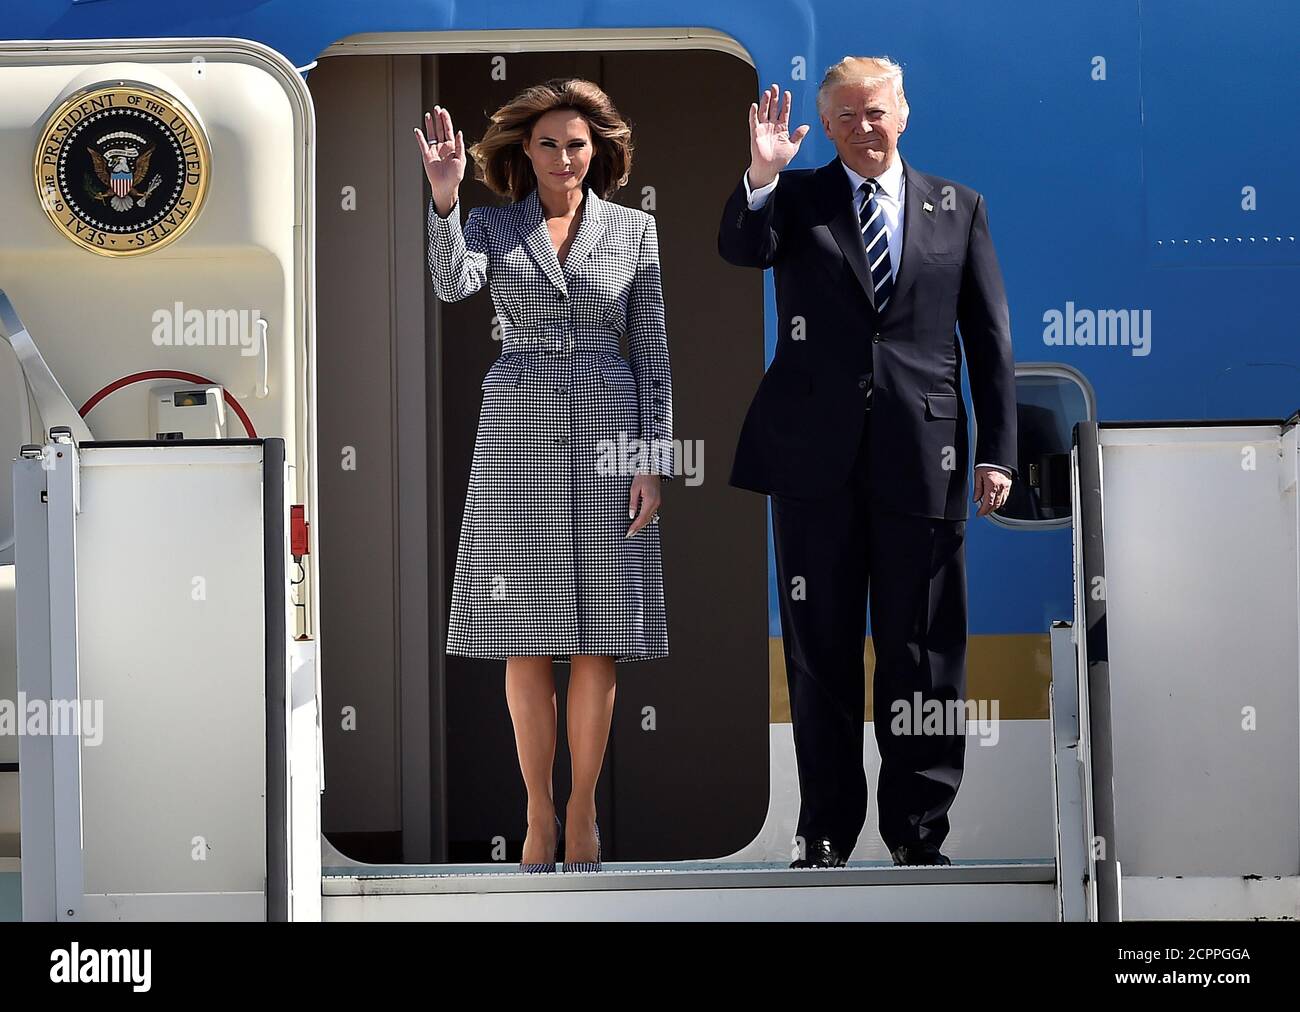 U.S. President Donald Trump and first lady Melania Trump arrive at the  Brussels Airport, in Brussels, Belgium, May 24, 2017. REUTERS/Hannah McKay  Stock Photo - Alamy